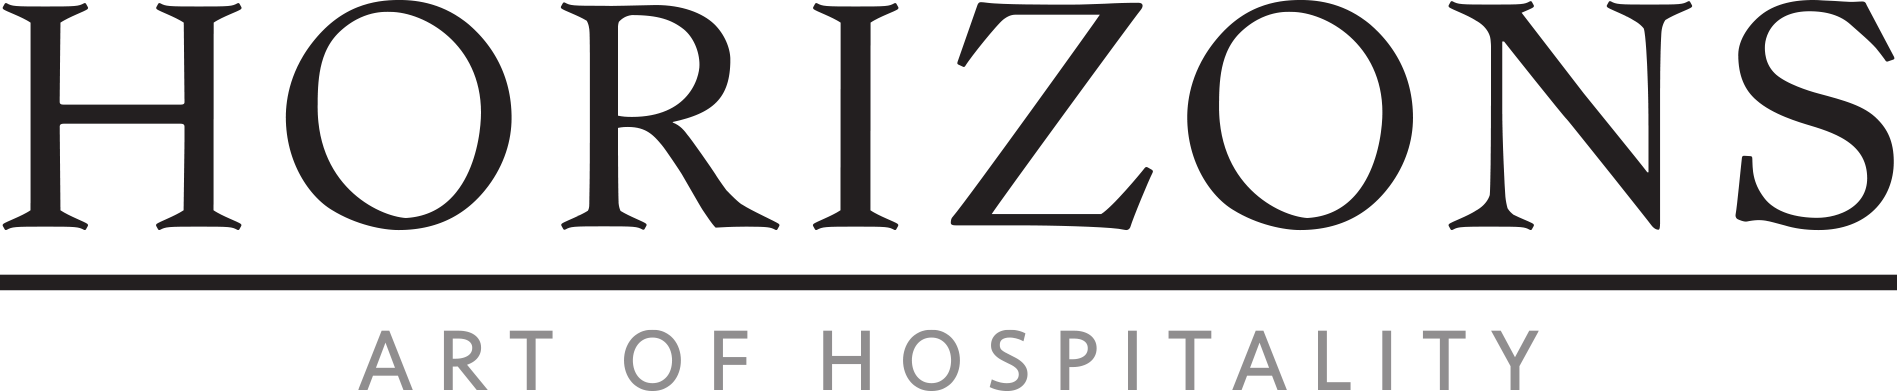 Horizons Conference Center's Logo